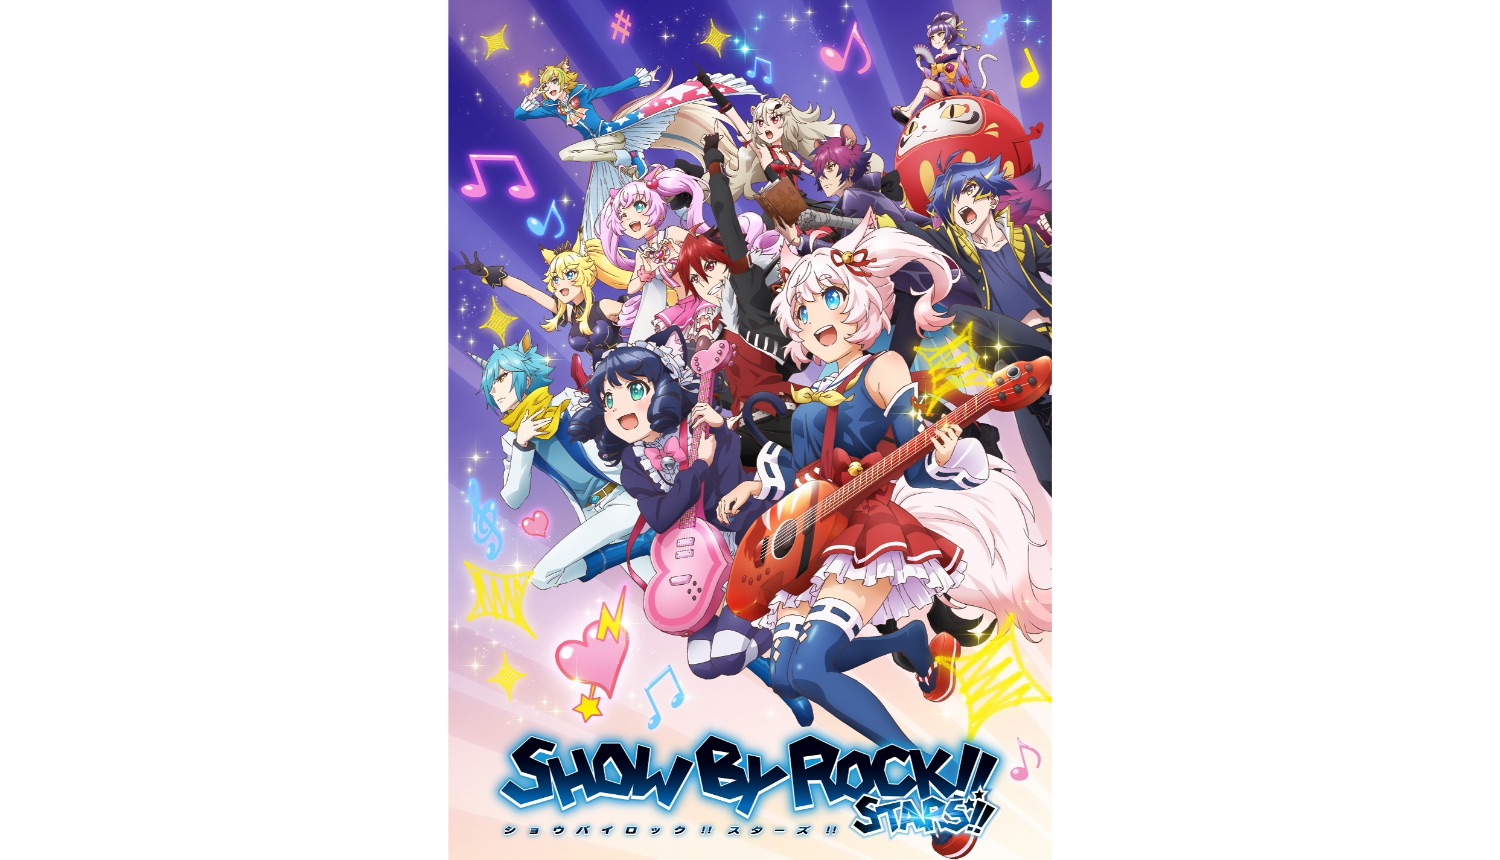 Show By Rock!! Stars!! – Episode 3 - Mashumairesh in Midi City